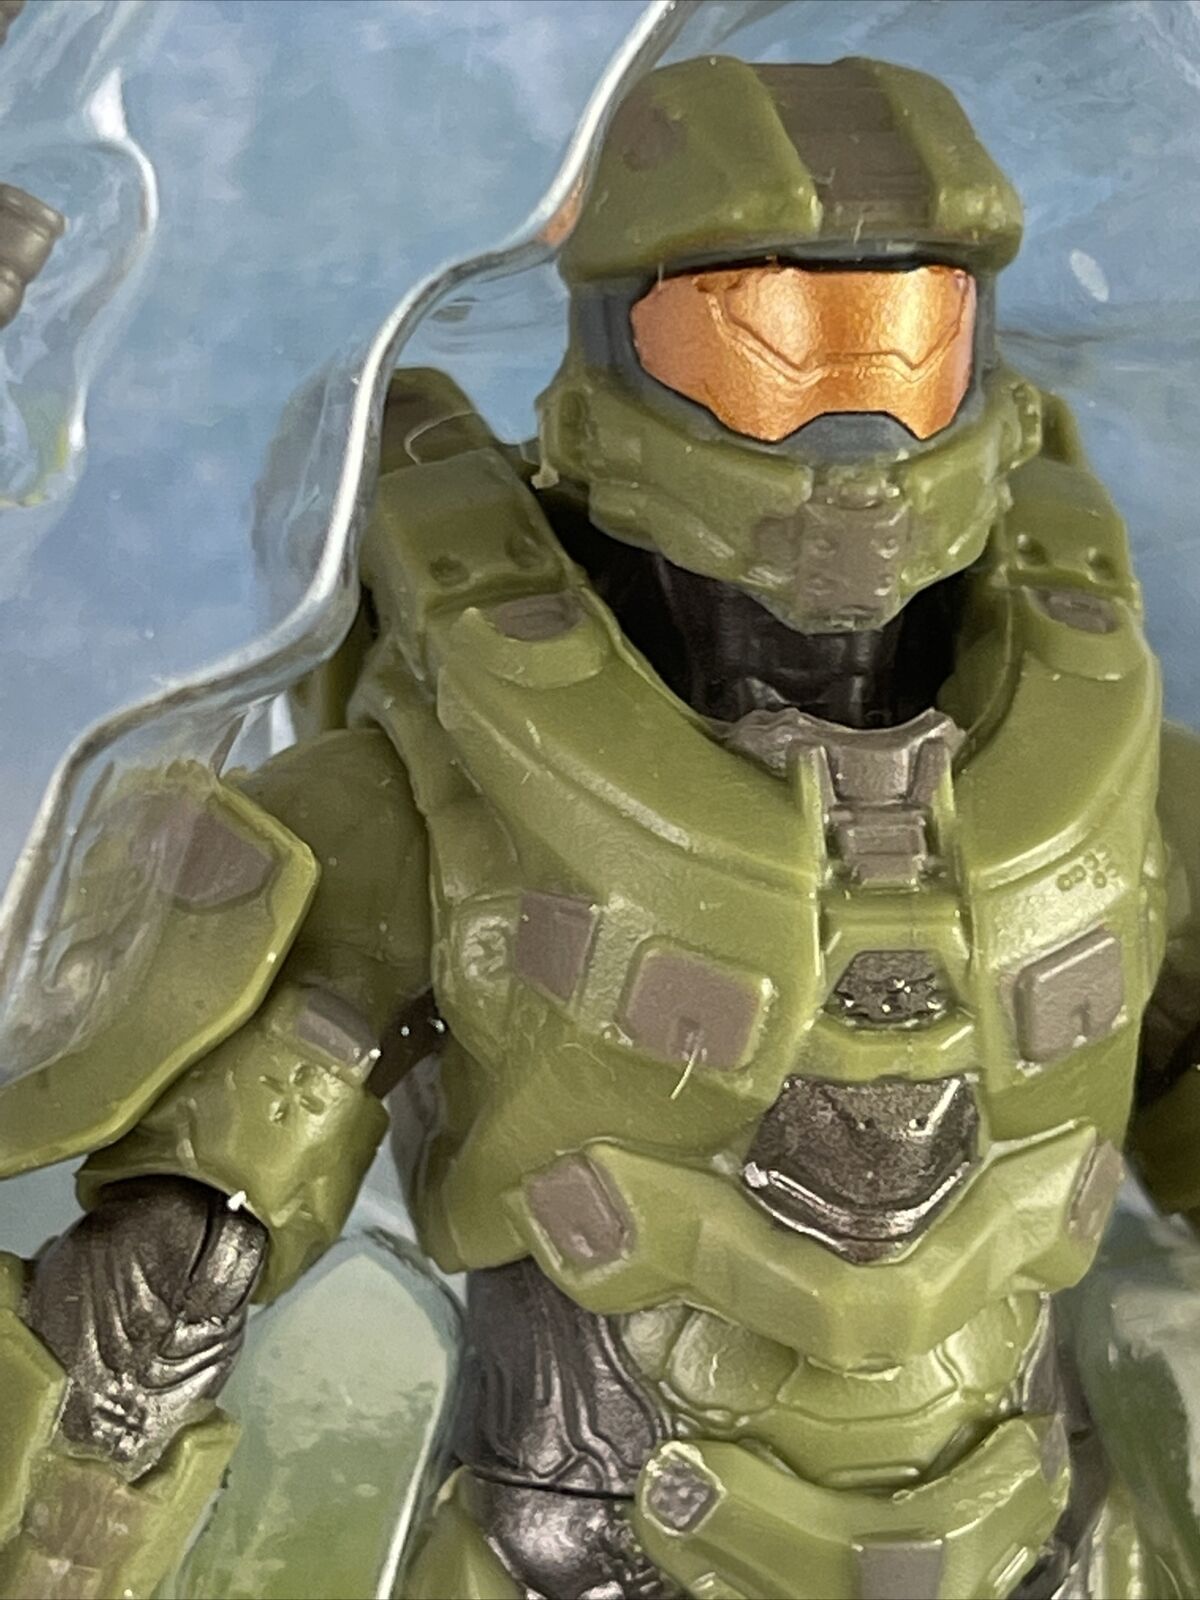 HALO INFINITE MASTER CHIEF FIGURE w/ ASSAULT RIFLE SERIES 2 NEW SEALED 4.5  INCH